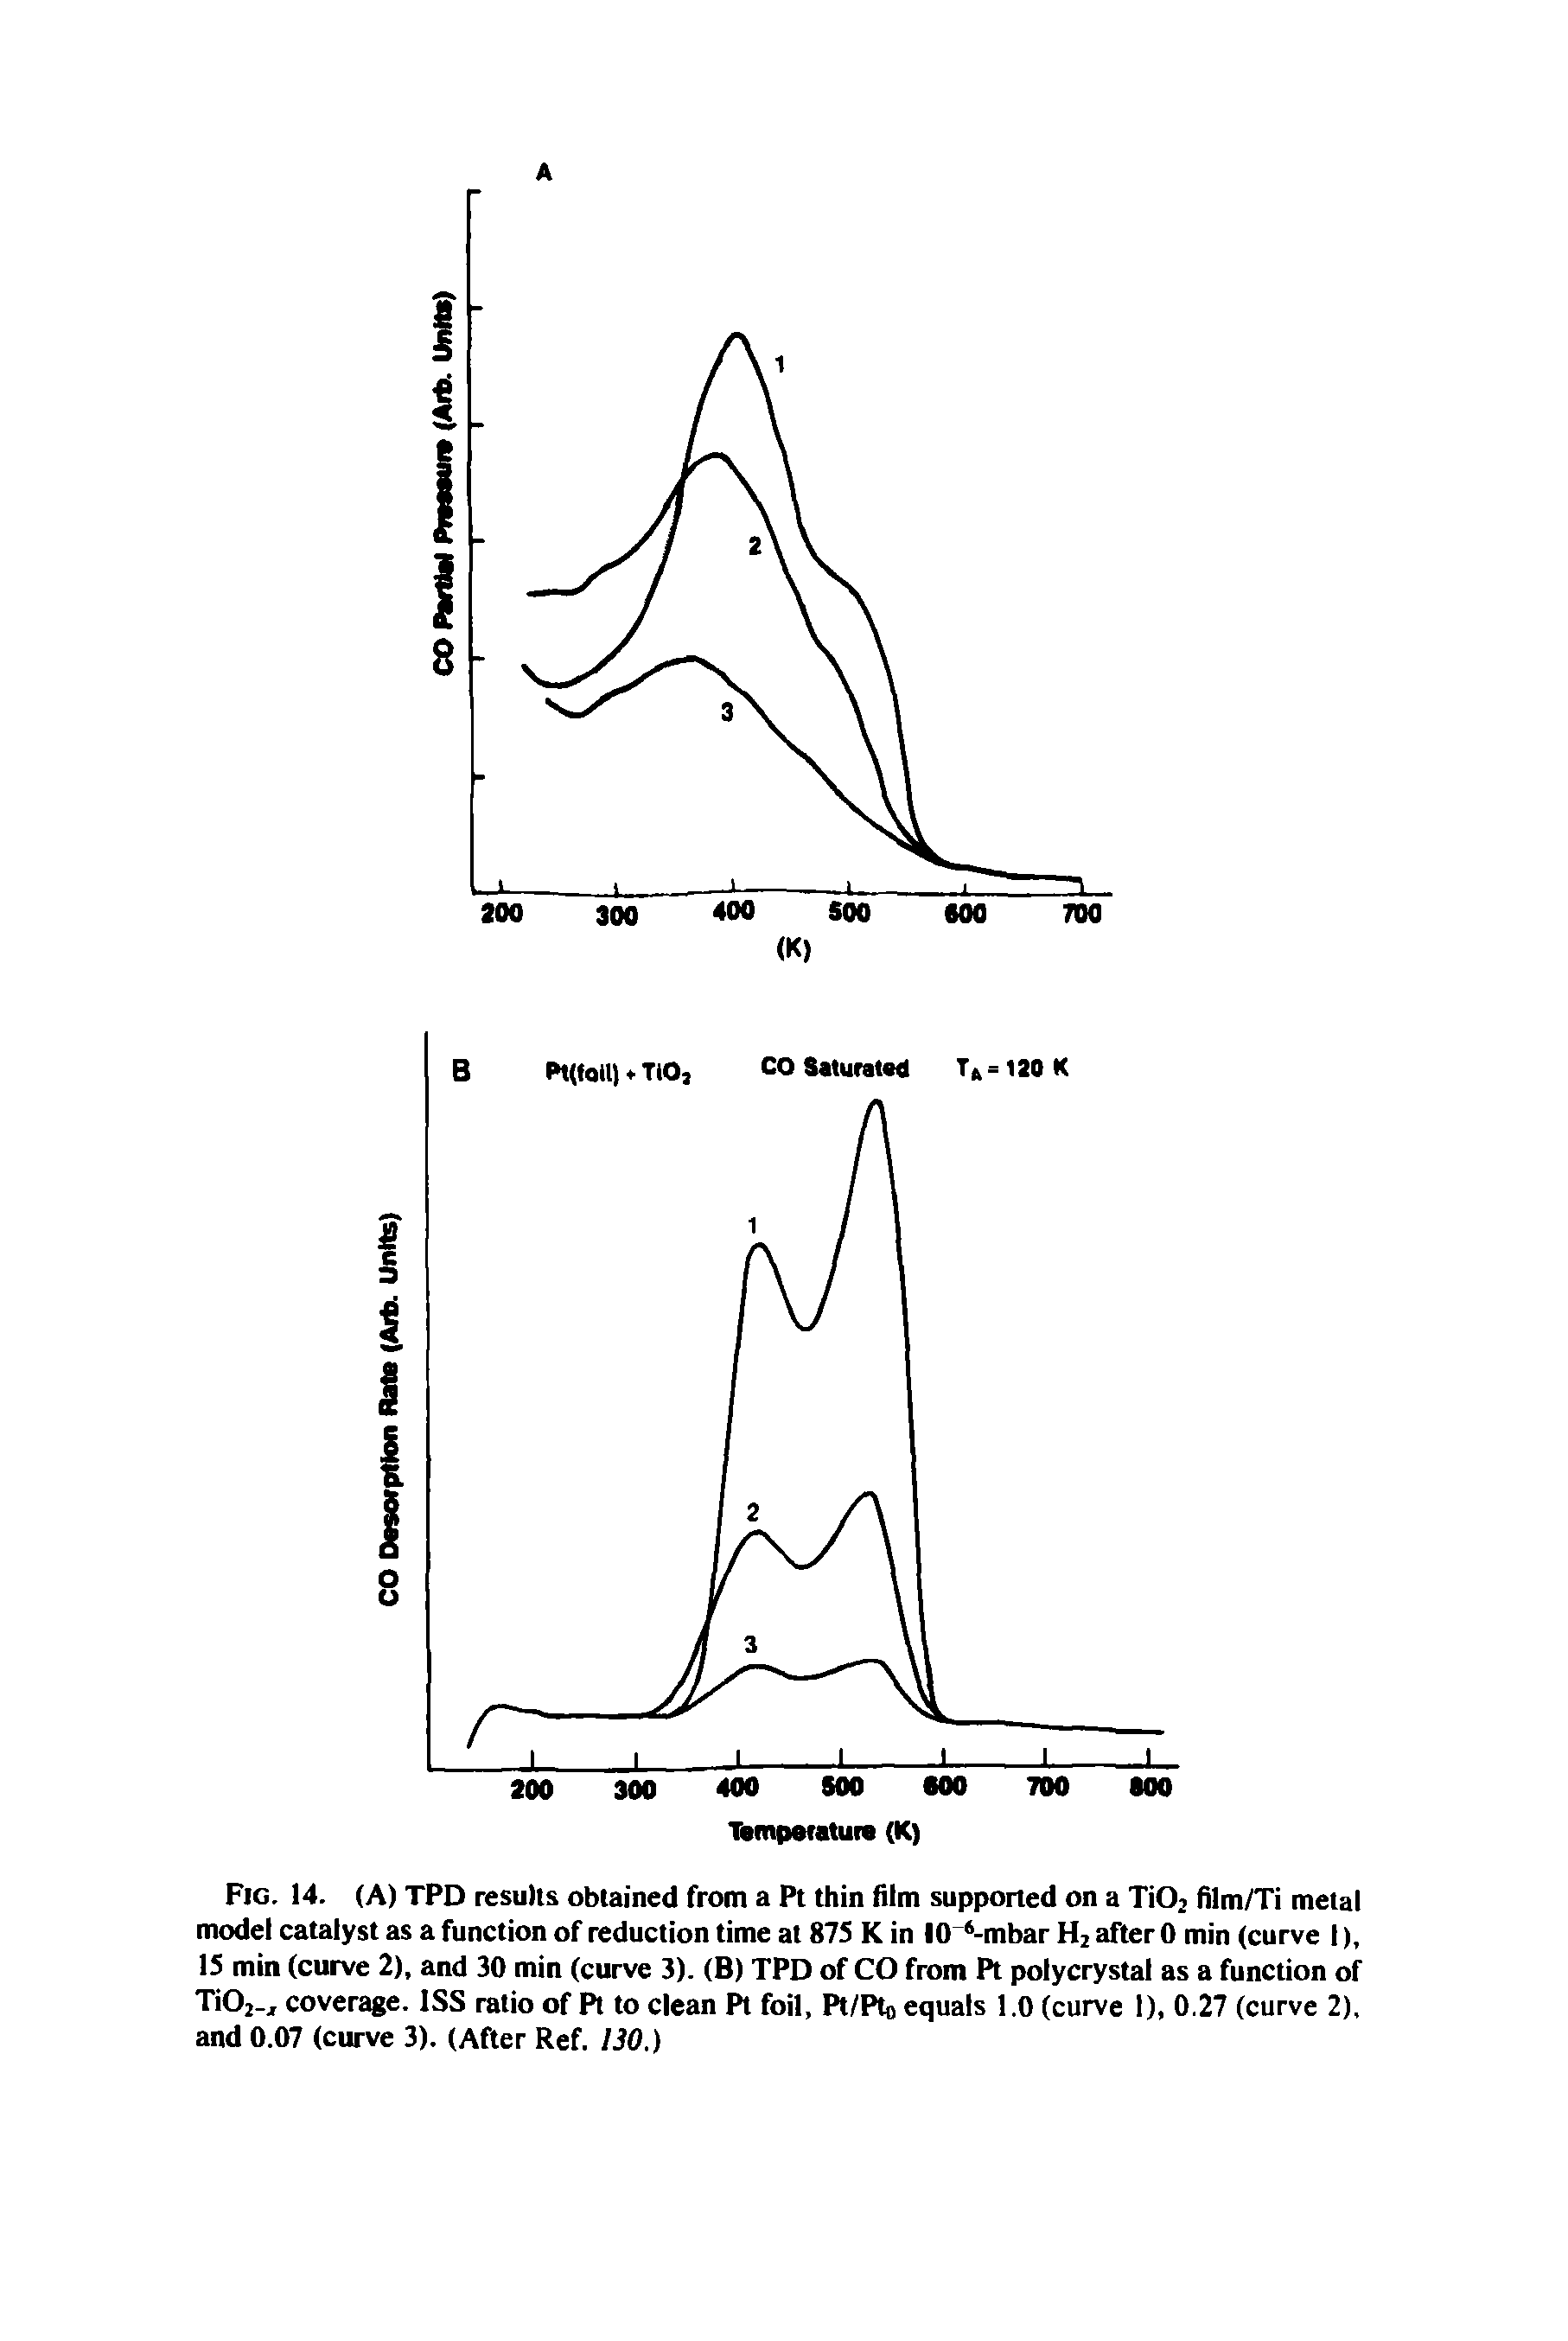 Fig. 14. (A) TPD results obtained from a Pt thin film supported on a Ti02 film/Ti metal model catalyst as a function of reduction time at 875 K in 10 -mbar H2 after 0 min (curve I), IS min (curve 2), and 30 min (curve 3). (B) TPD of CO from Pt polycrystal as a function of Ti02, coverage. 1SS ratio of Pt to clean Pt foil, Pt/Pto equals 1.0 (curve 1), 0.27 (curve 2), and 0.07 (curve 3). (After Ref. 130.)...